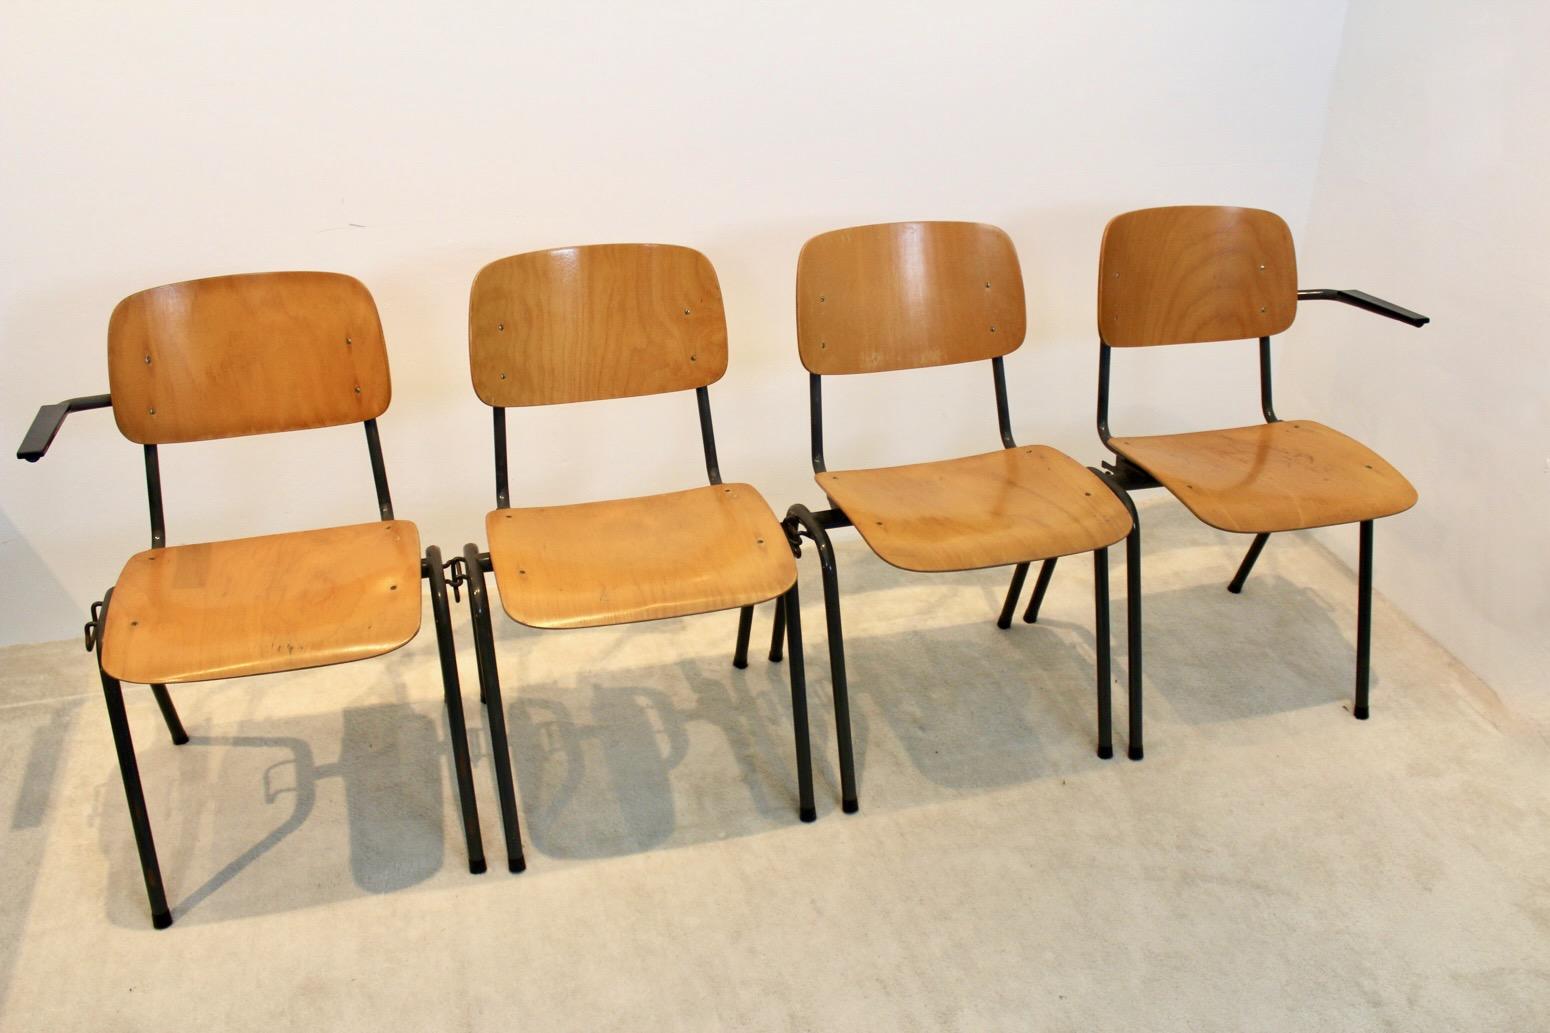 Unique Industrial Plywood Stackable School Sofa Seat by Marko Holland, 1960s For Sale 1